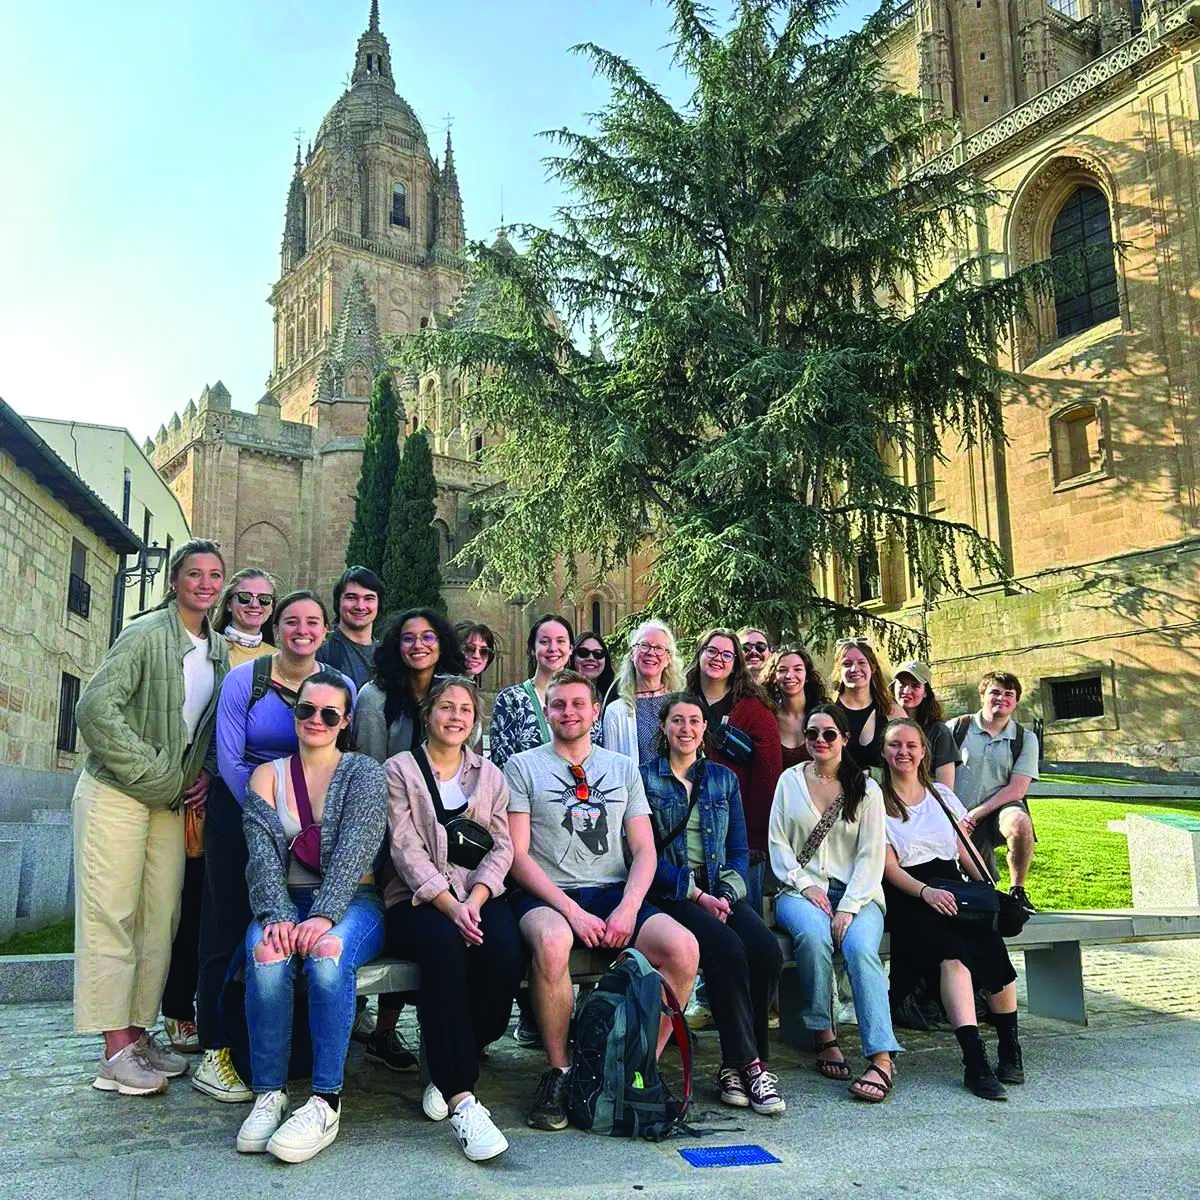 NMU students in Spain posing for an outdoor group photo